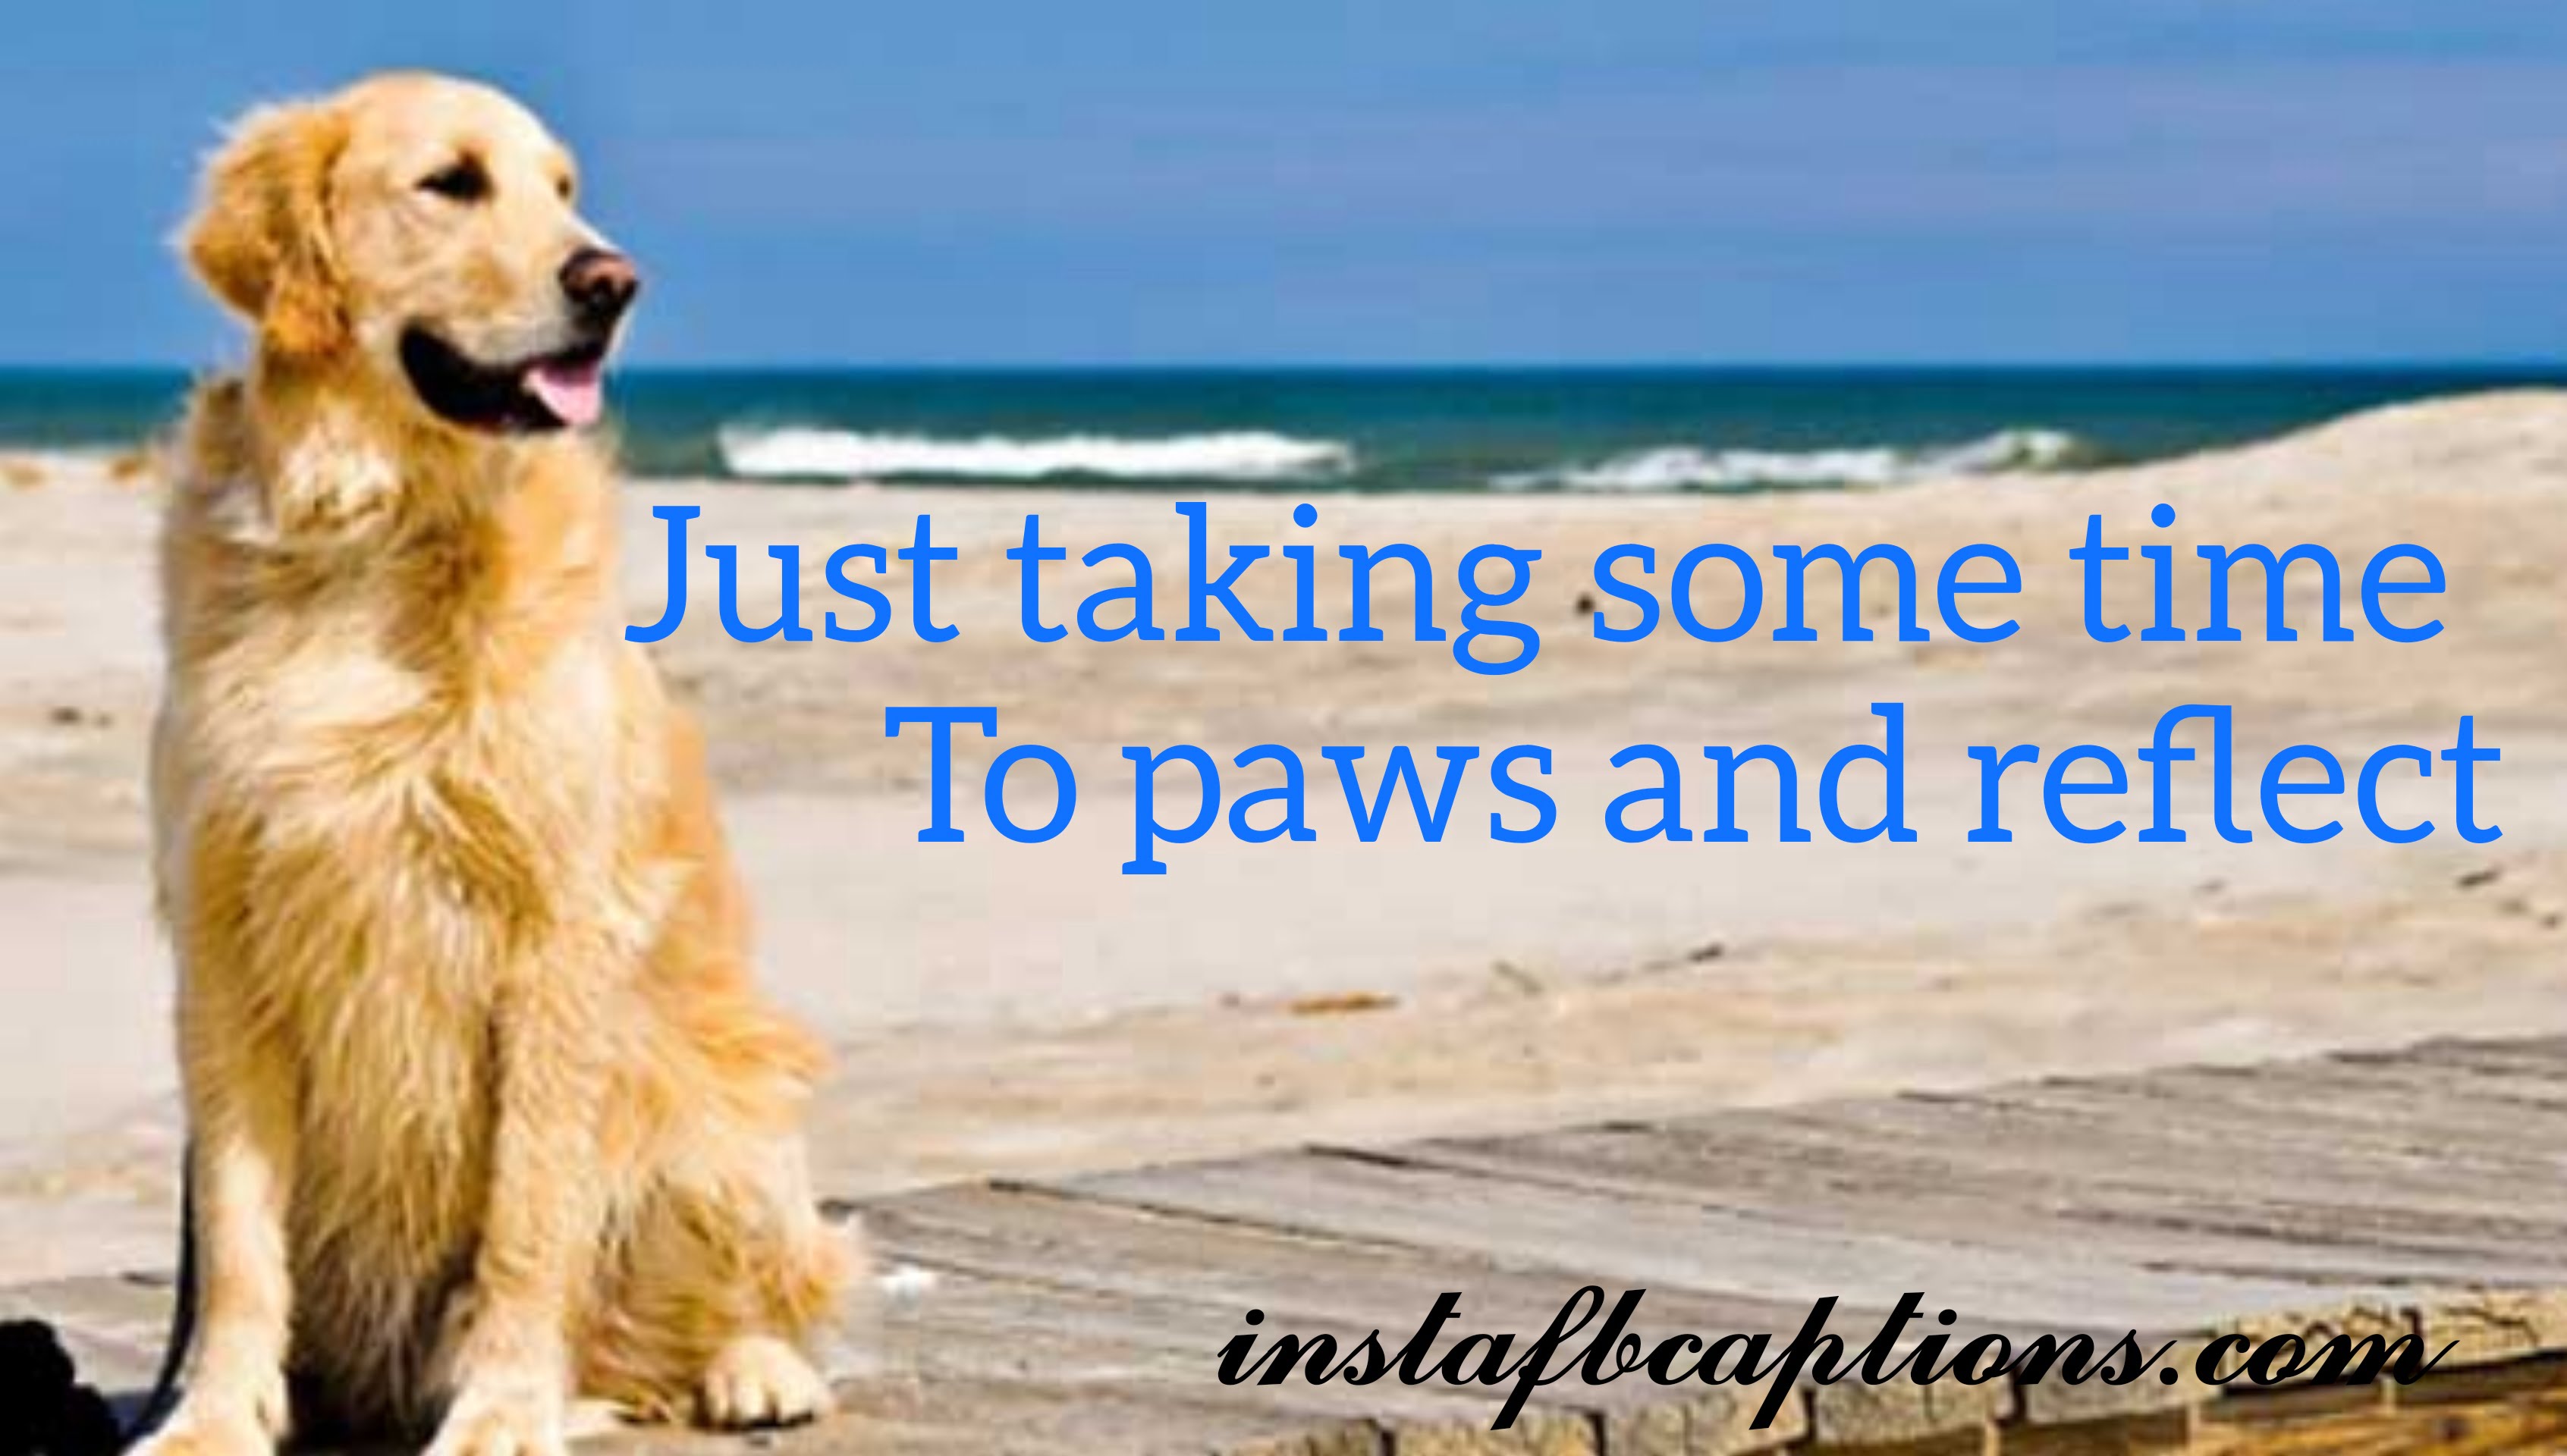 Dog On Beach Captions  - Dog on beach captions - 150+ DOGS &#038; PUPPY Instagram Captions for Dog Lovers 2022